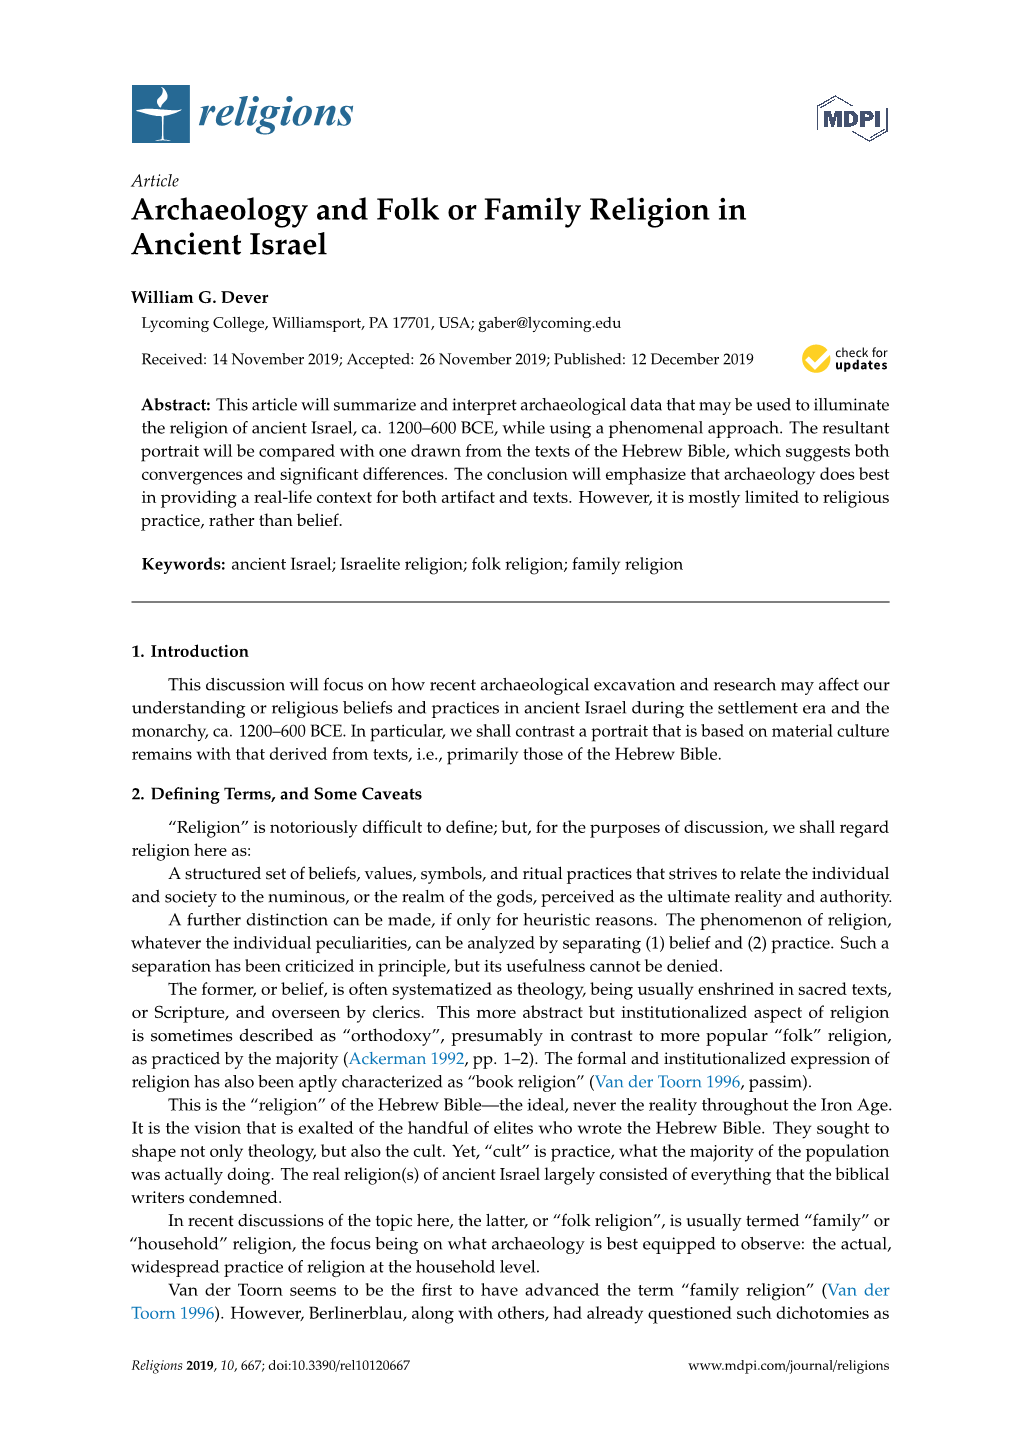 Archaeology and Folk Or Family Religion in Ancient Israel